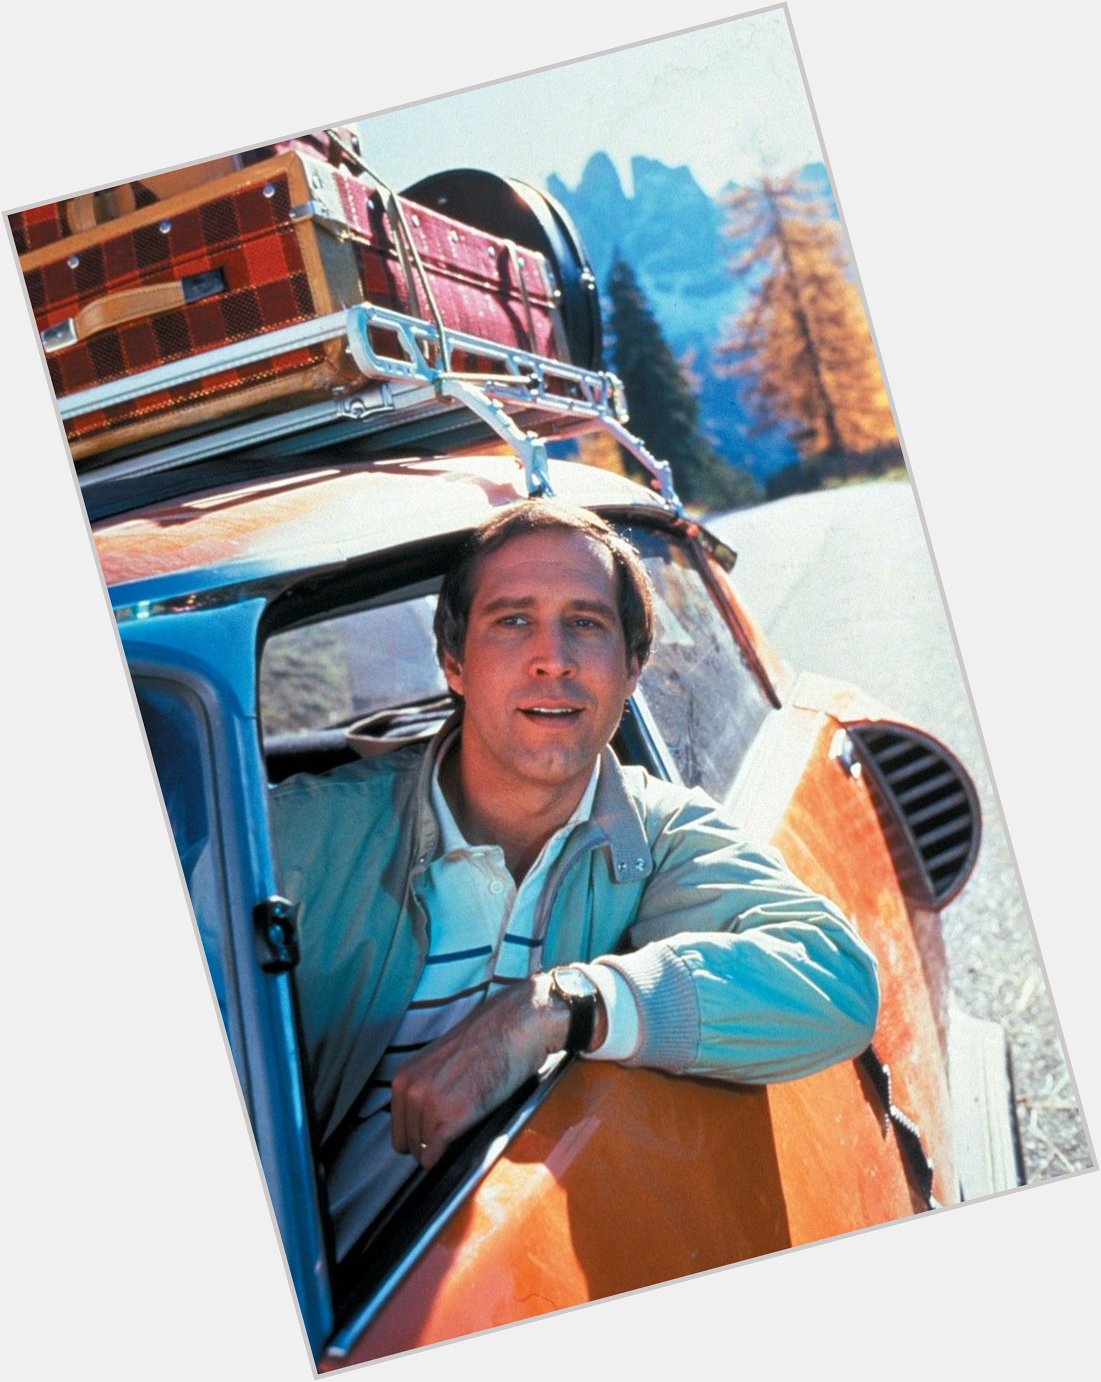 Happy Birthday Chevy Chase! He is now 77!   